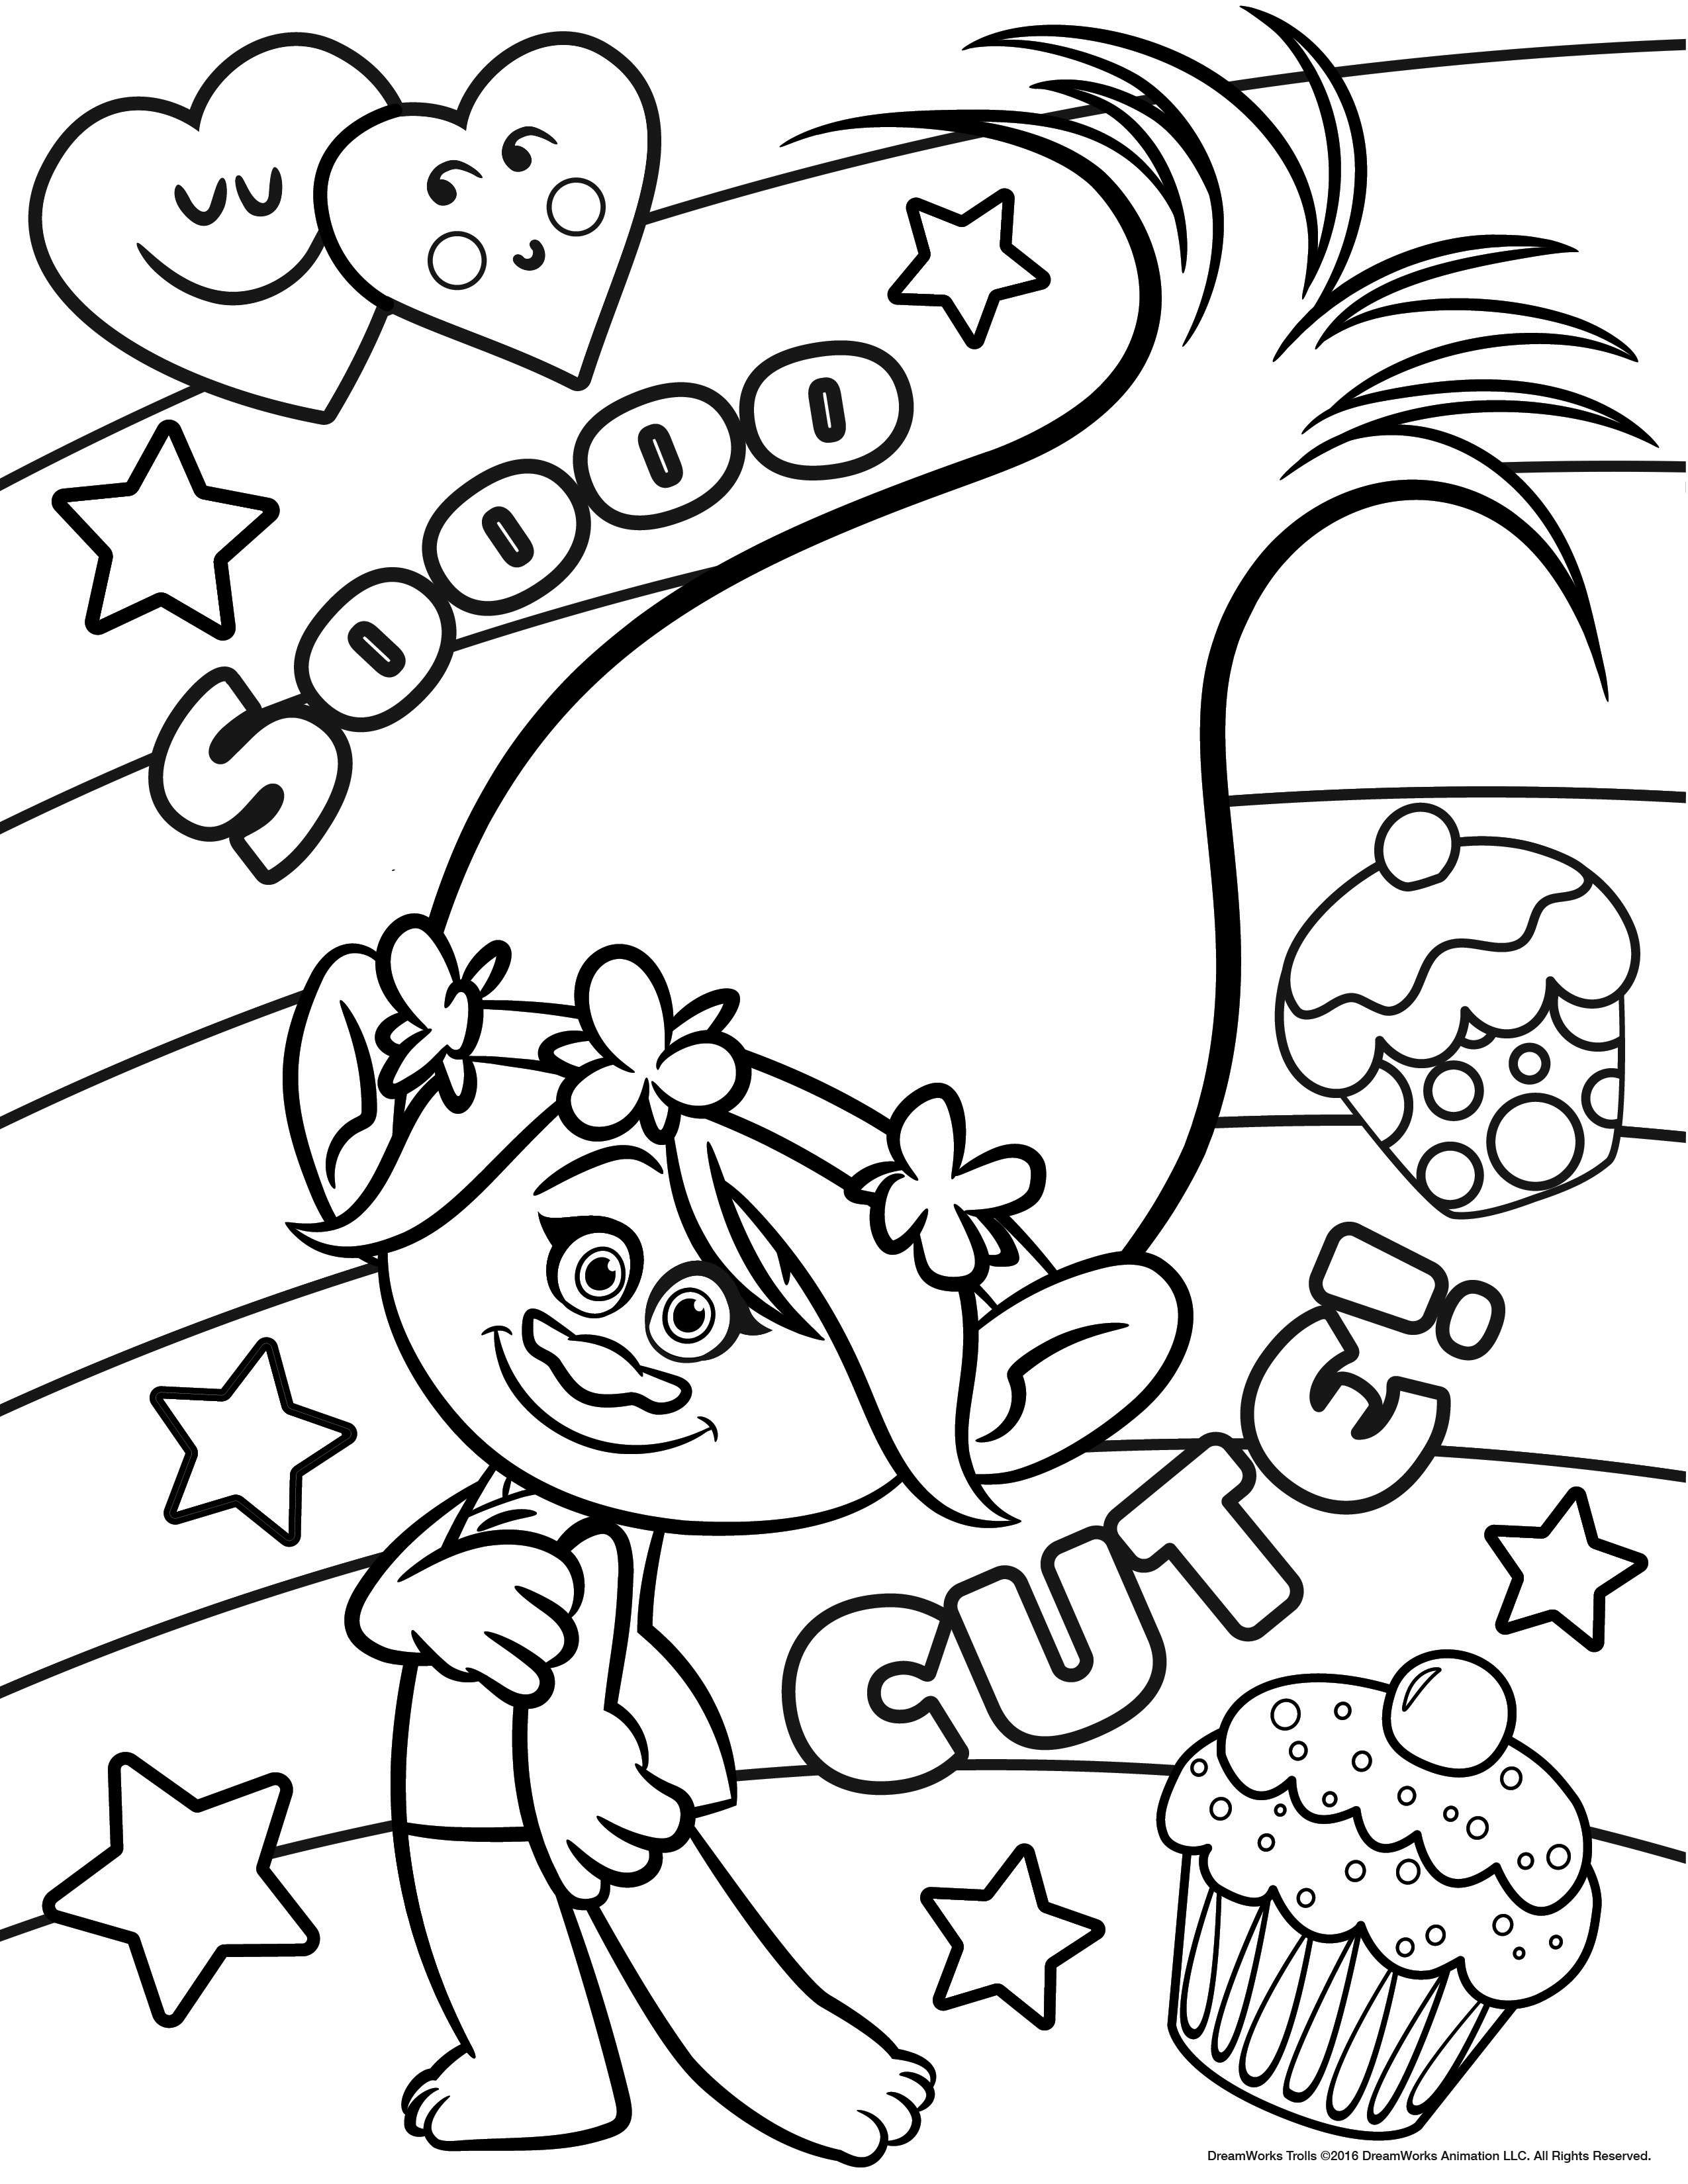 Poppy : so cute Trolls Kids Coloring Pages